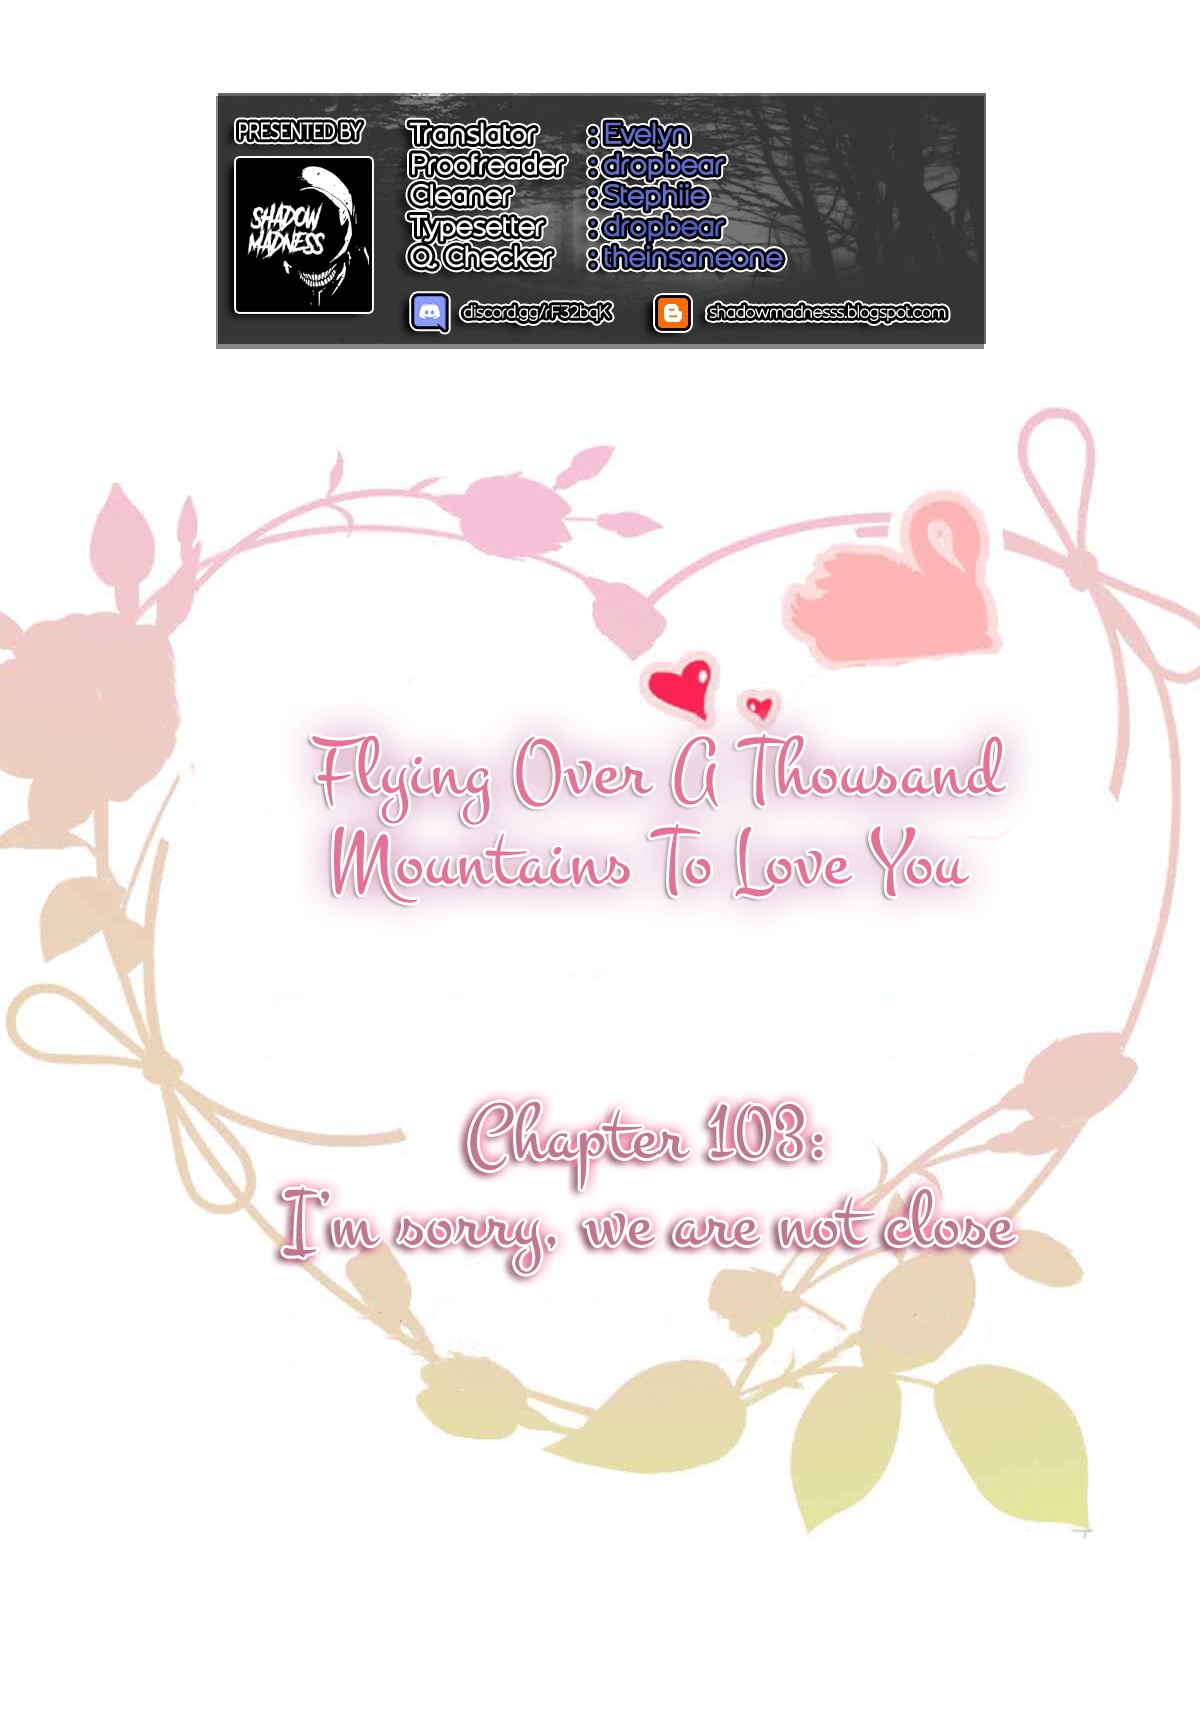 Flying Over a Thousand Mountains to Love You Ch. 103 I’m sorry, we are not close